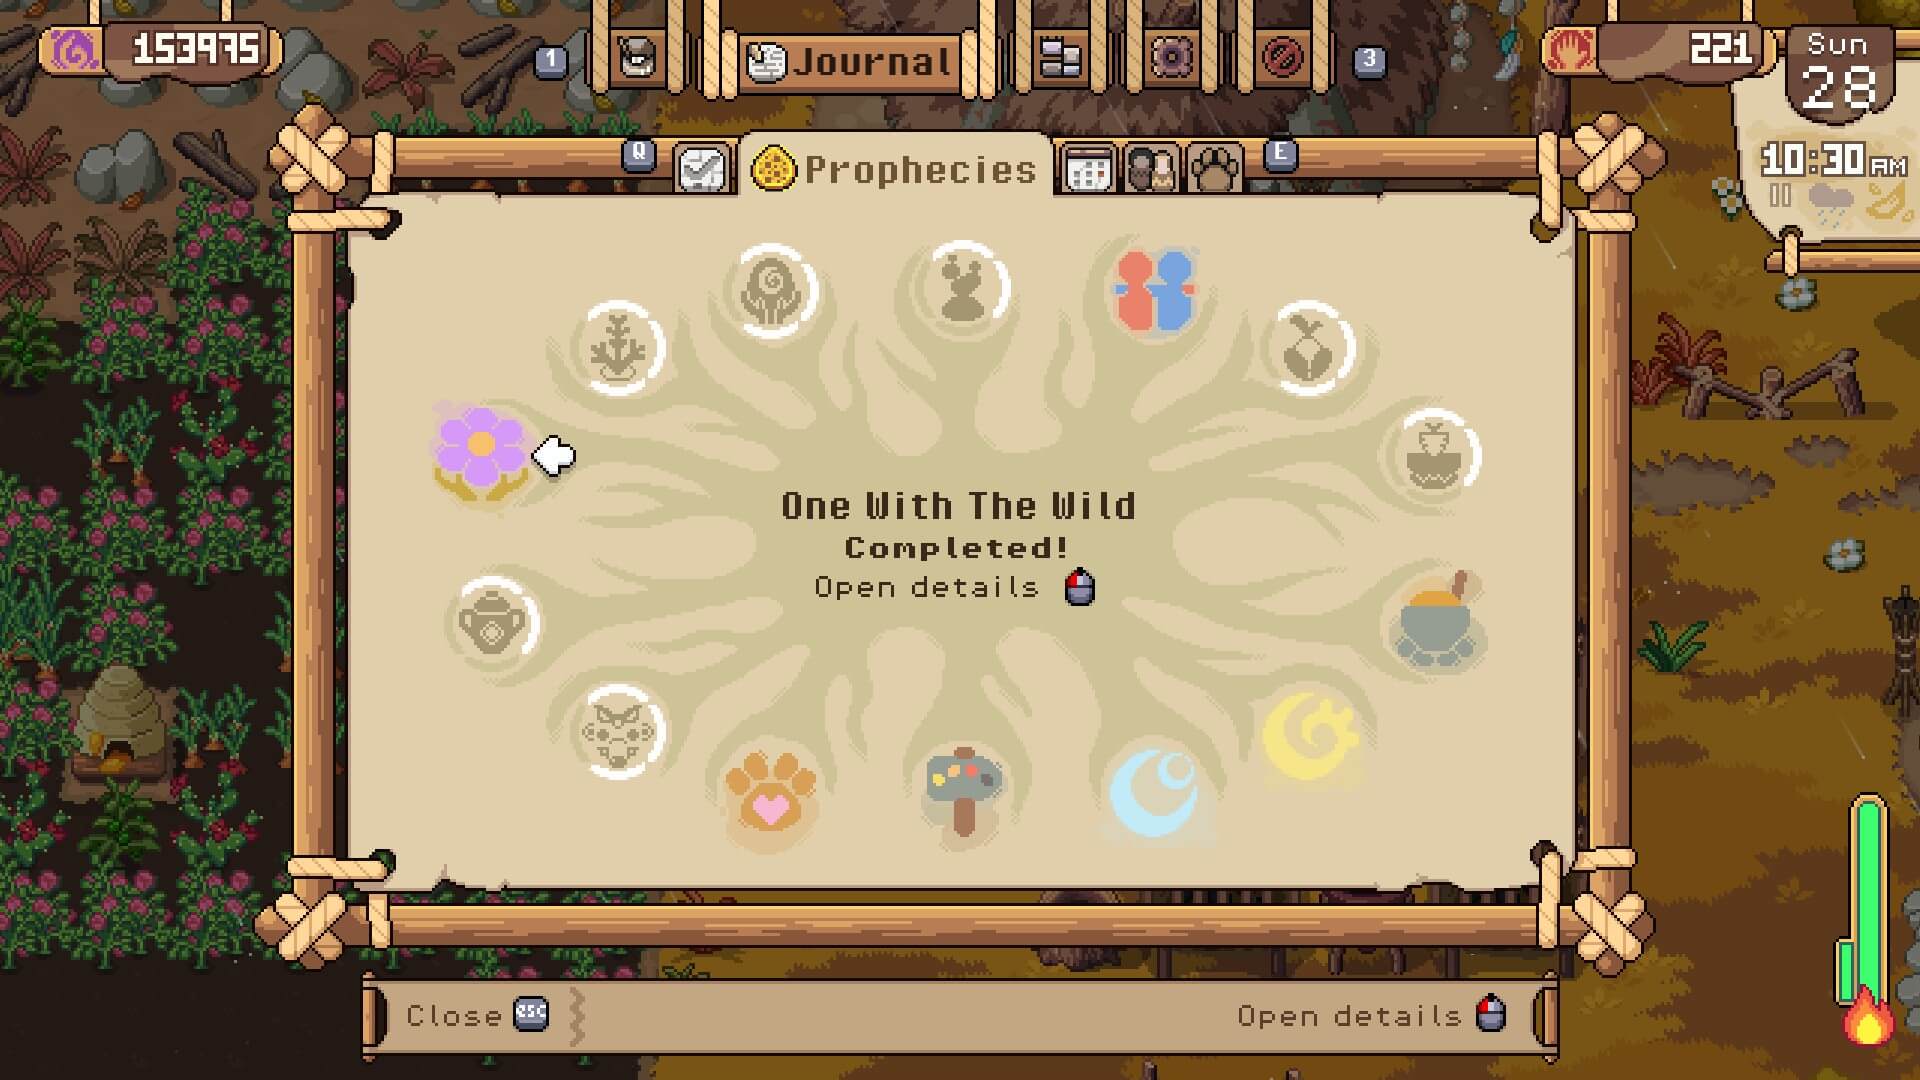 The prophecy menu in Roots of Pacha, highlighting the One With The Wild prophecy.